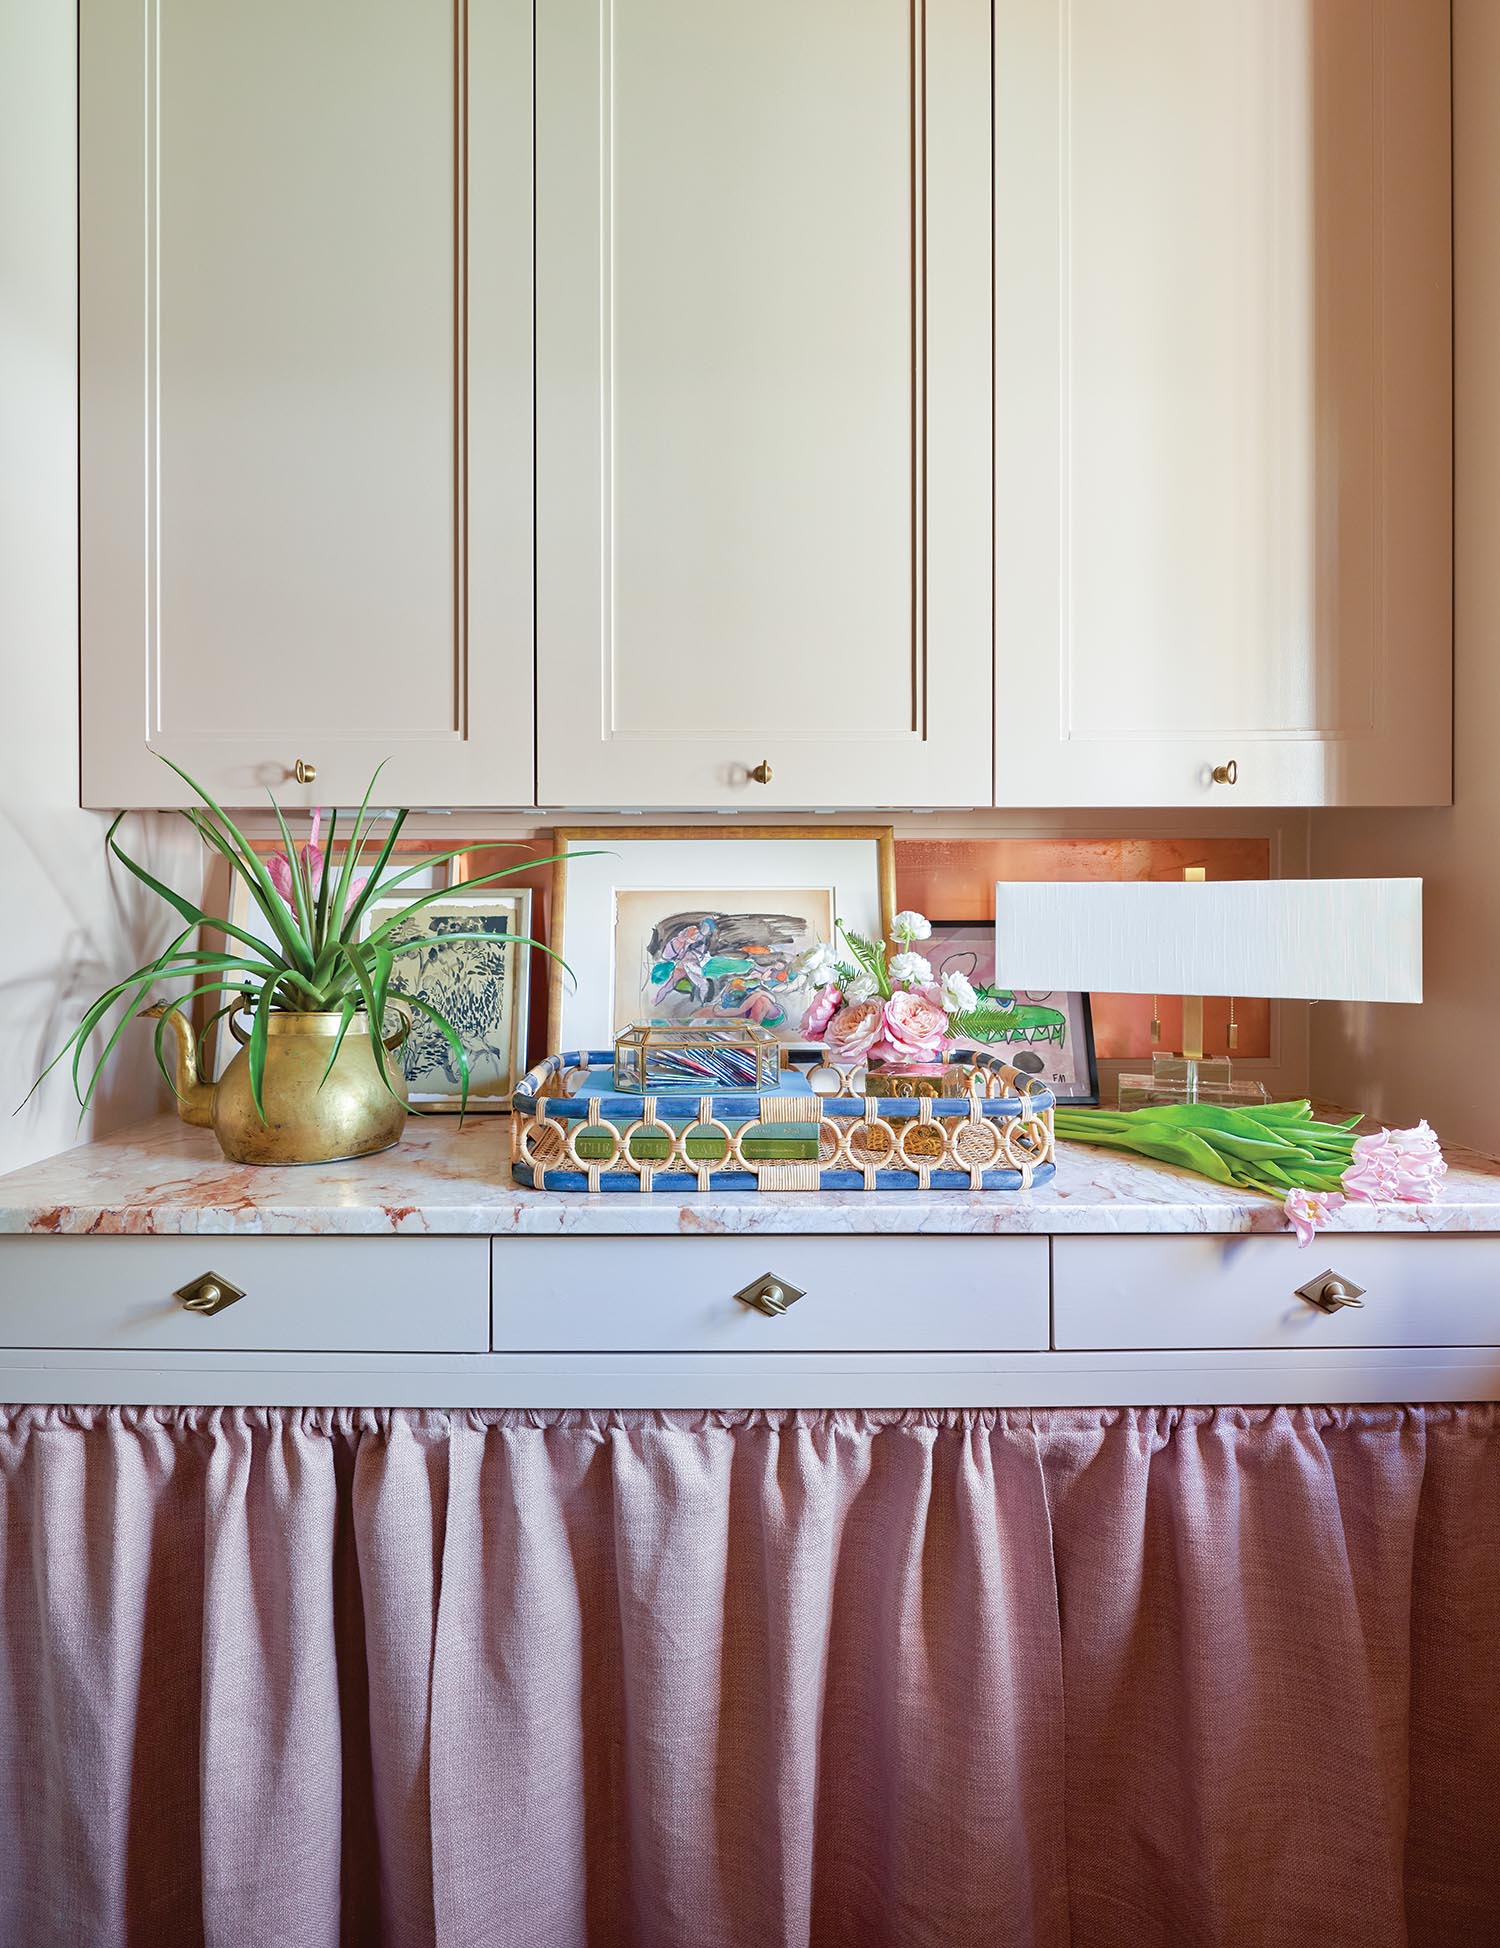 A laundry room has cream cabinets with linen curtains at the bottom.